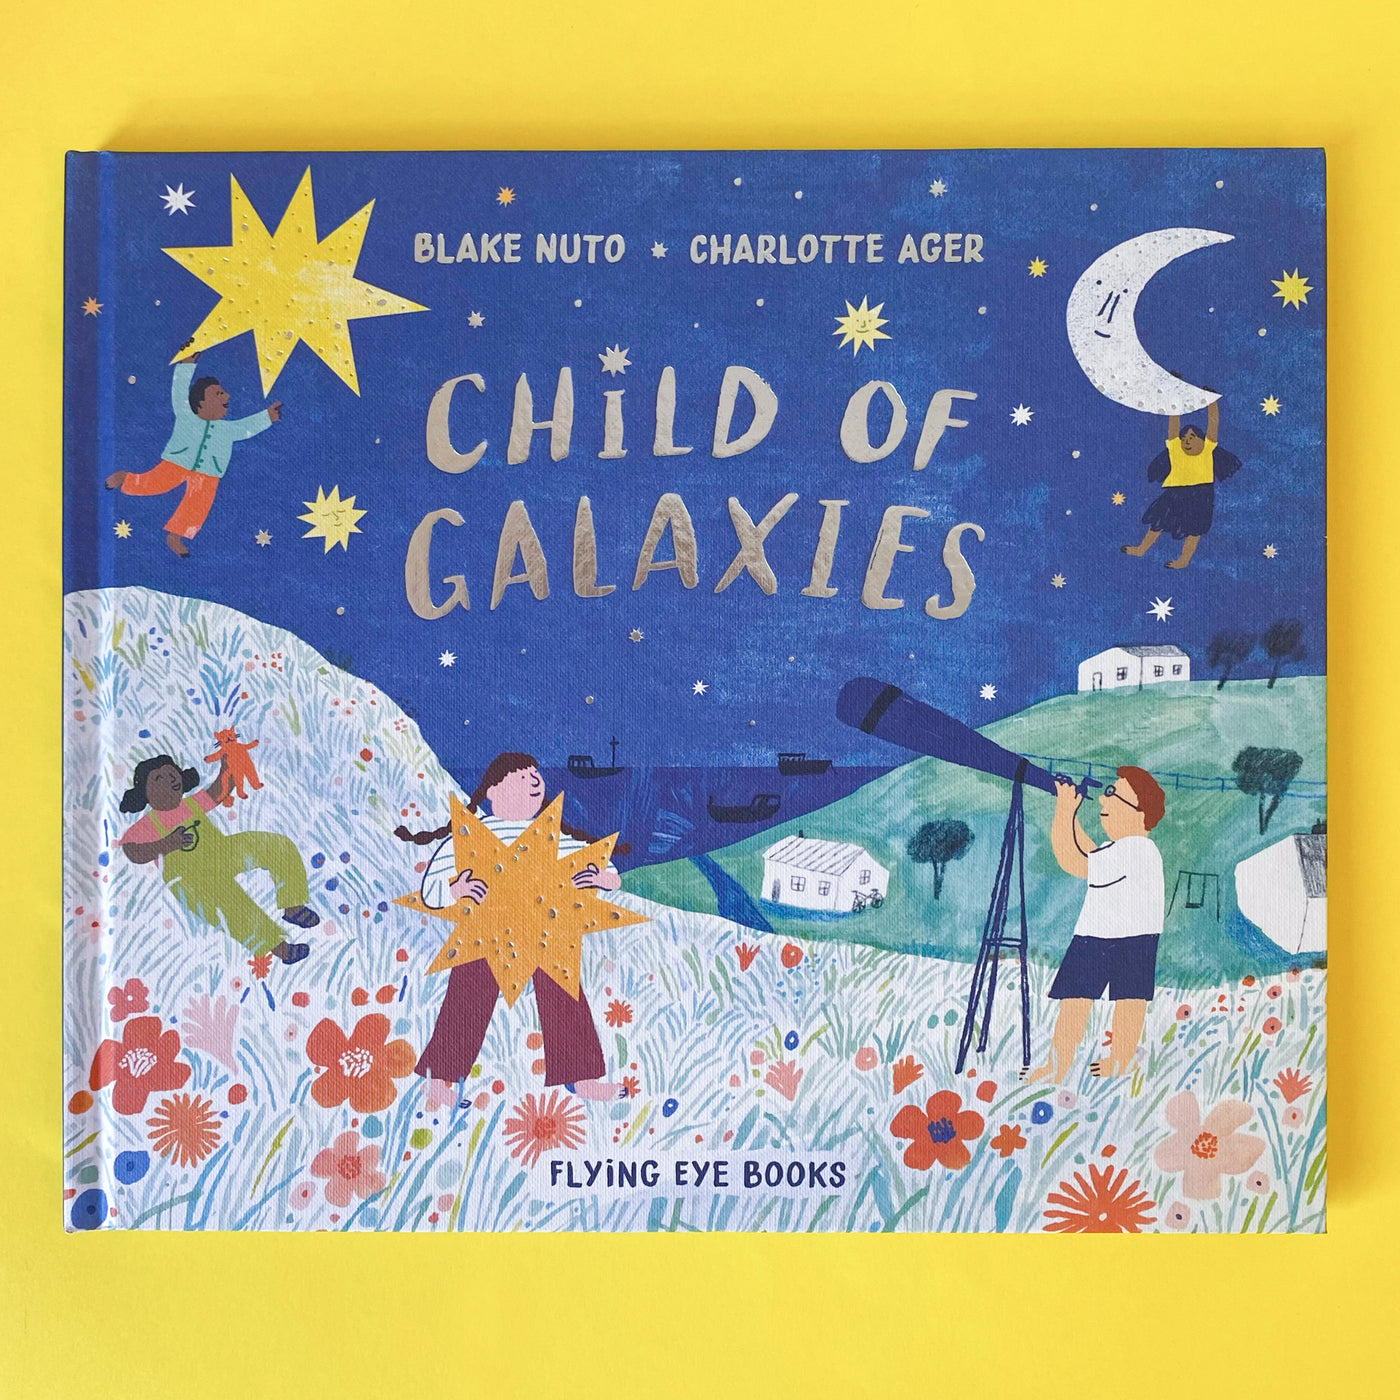 Child of Galaxies by Blake Nuto and Charlotte Ager